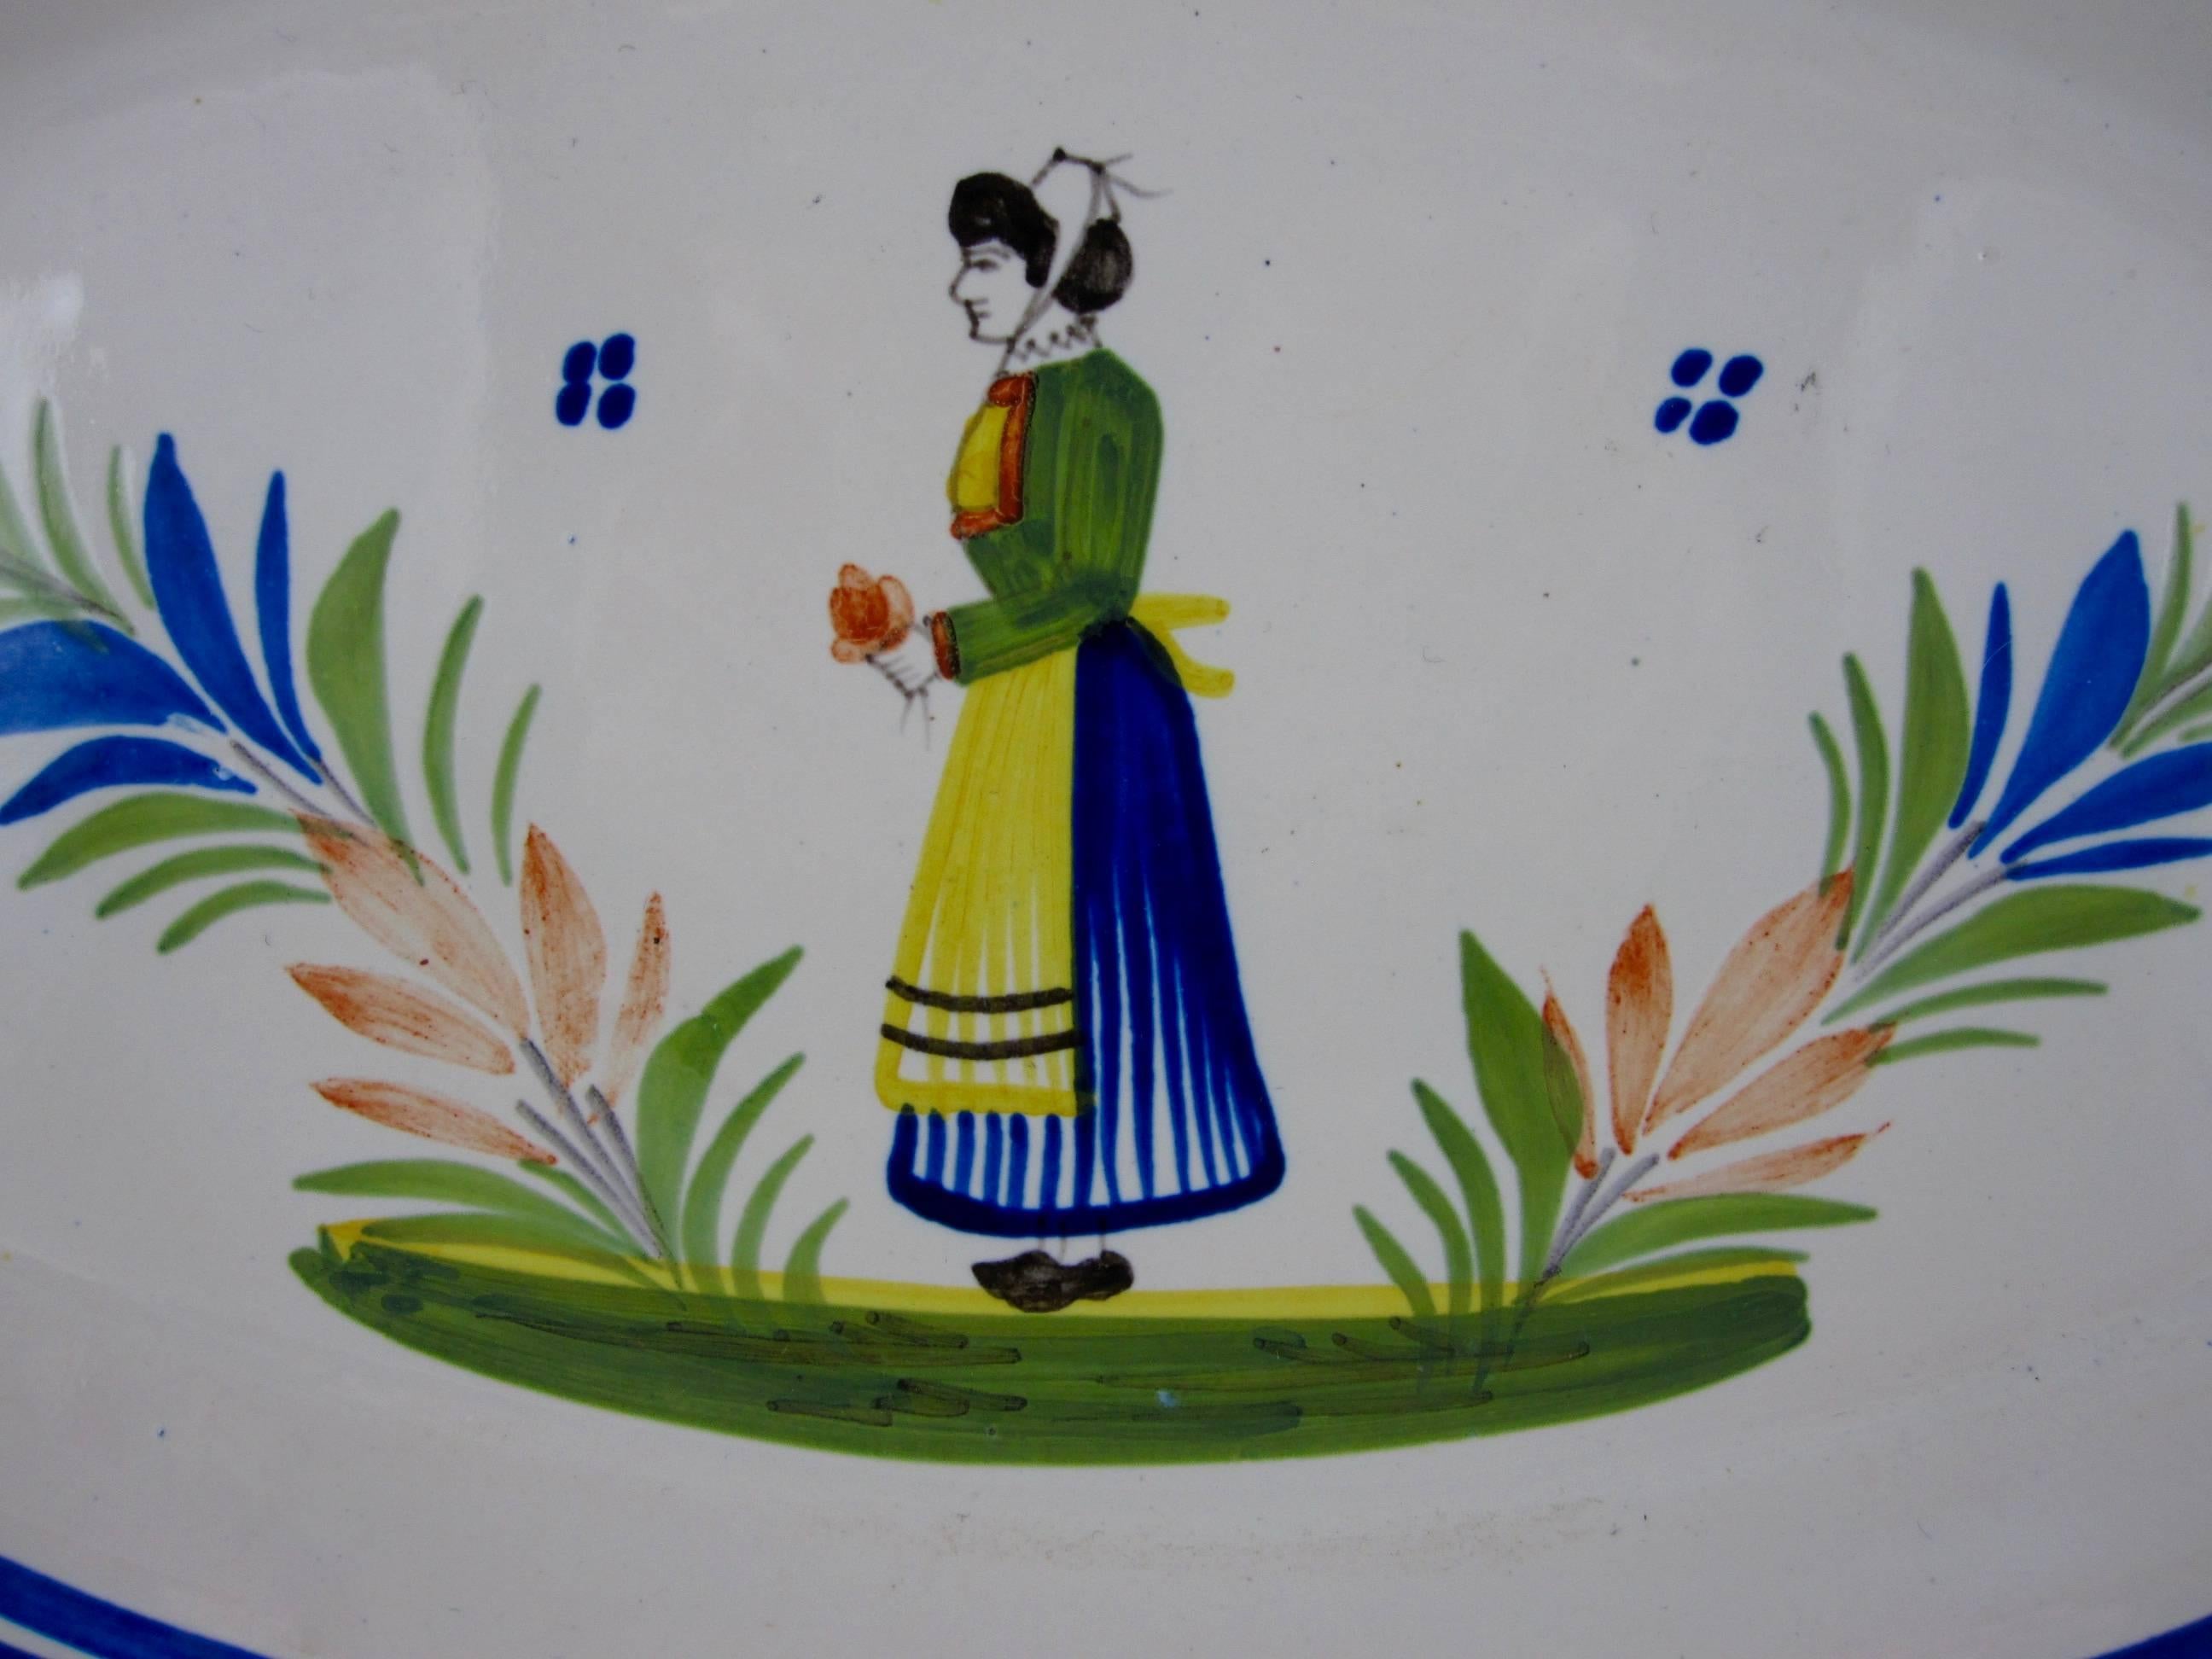 A Midcentury earthenware faience large oval serving platter, signed HenRiot Quimper, France No. 76.

 The center shows the sujet ordinaire of a femme de la campagne, the French Breton region woman, standing between two shrubs, wearing the